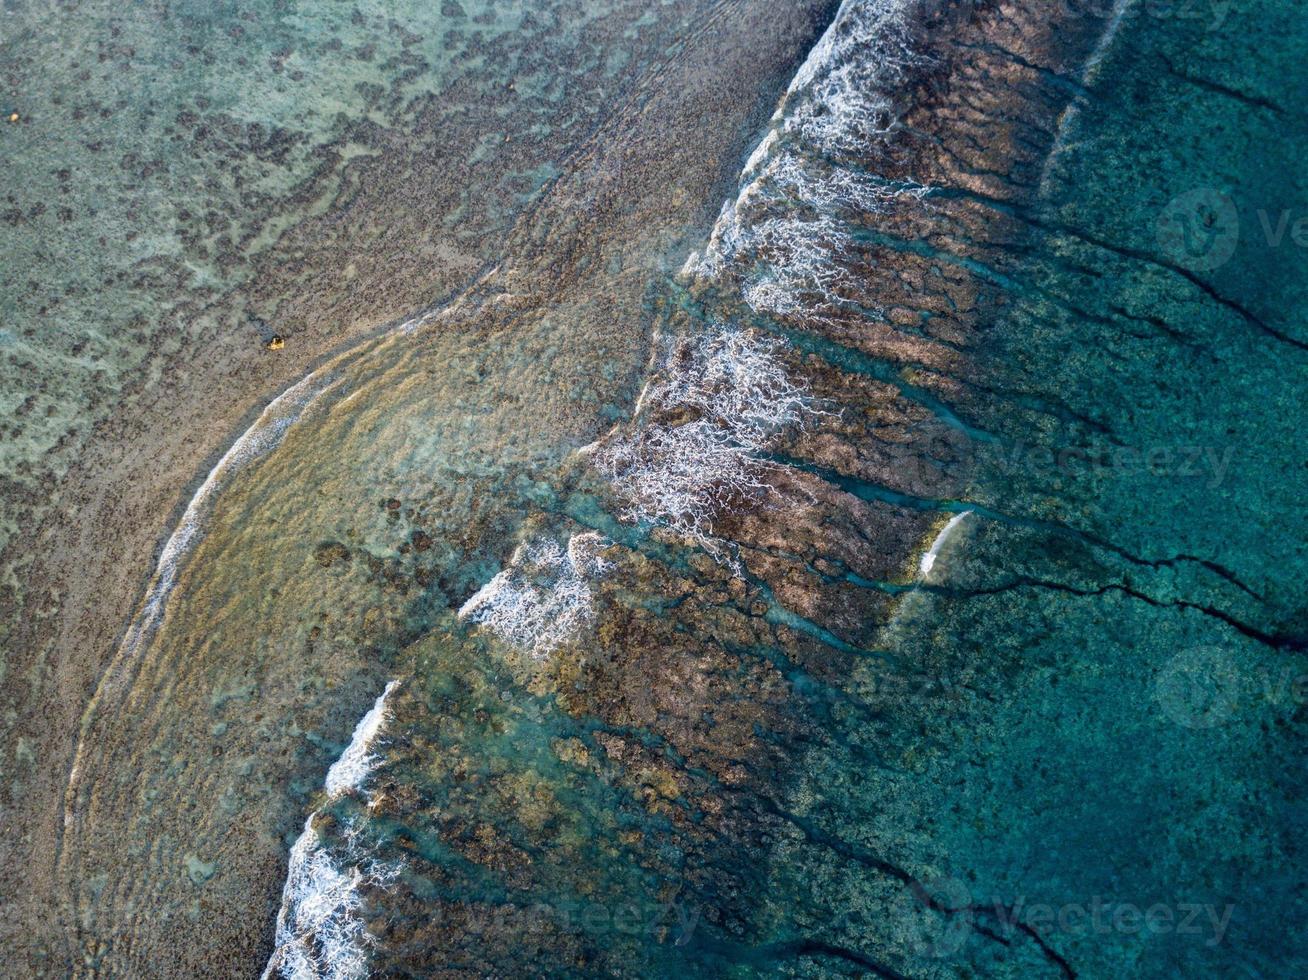 aerial view of waves on reef of polynesia Cook islands photo